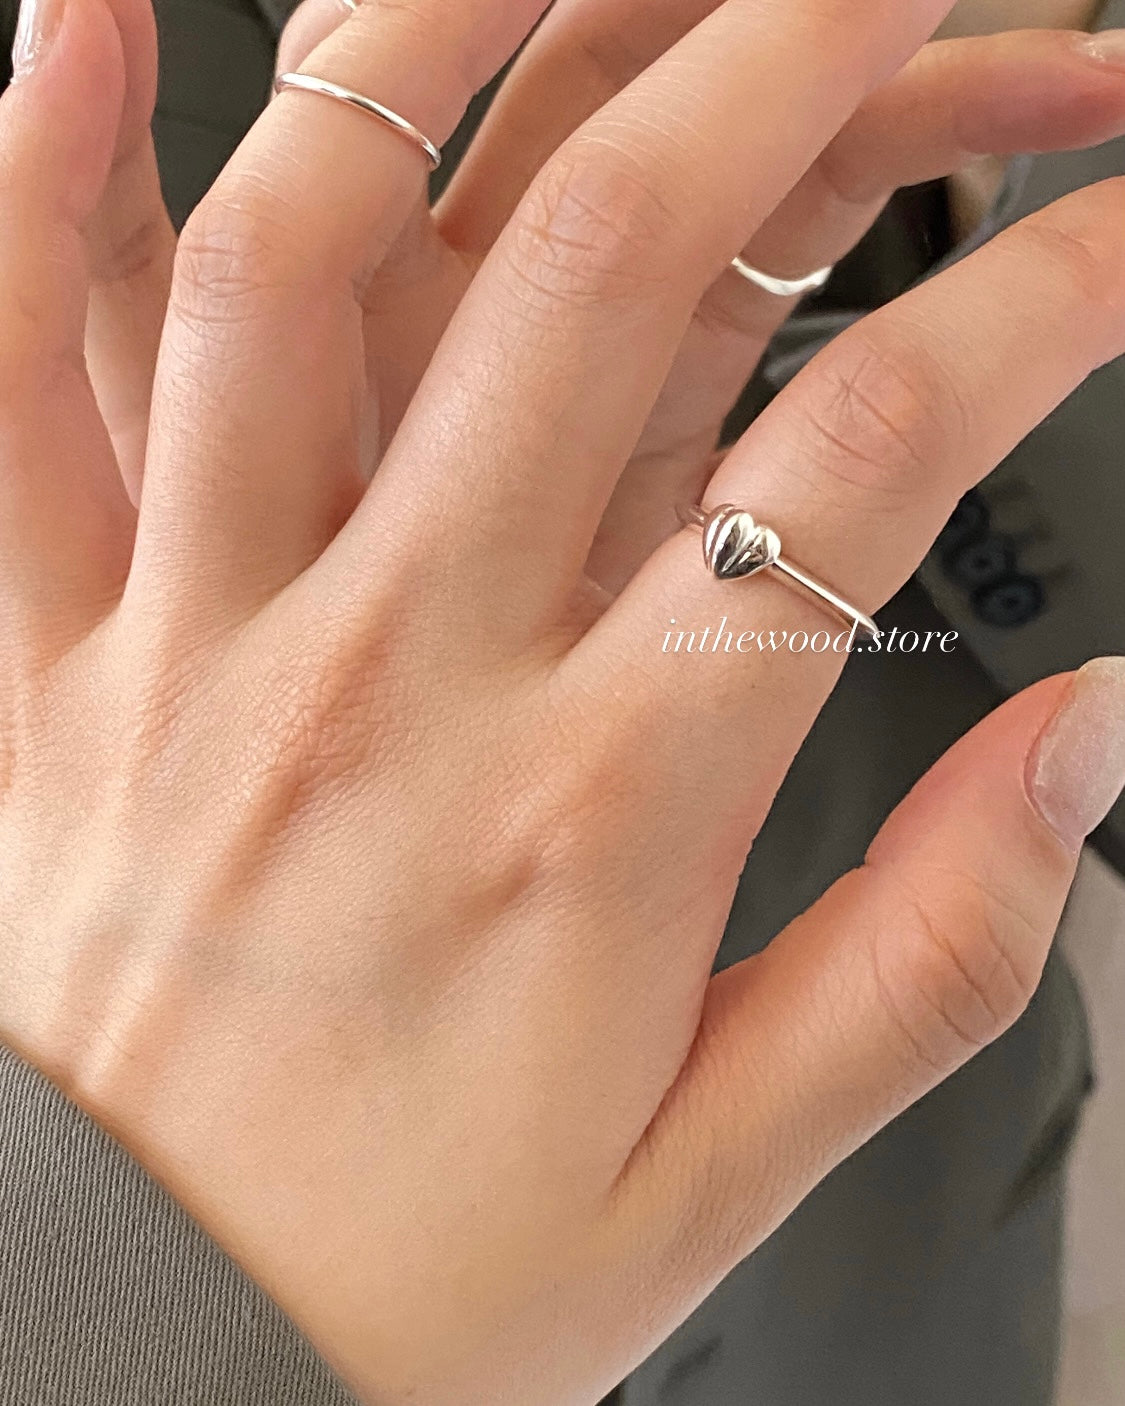 [925silver] Berry Heart Ring